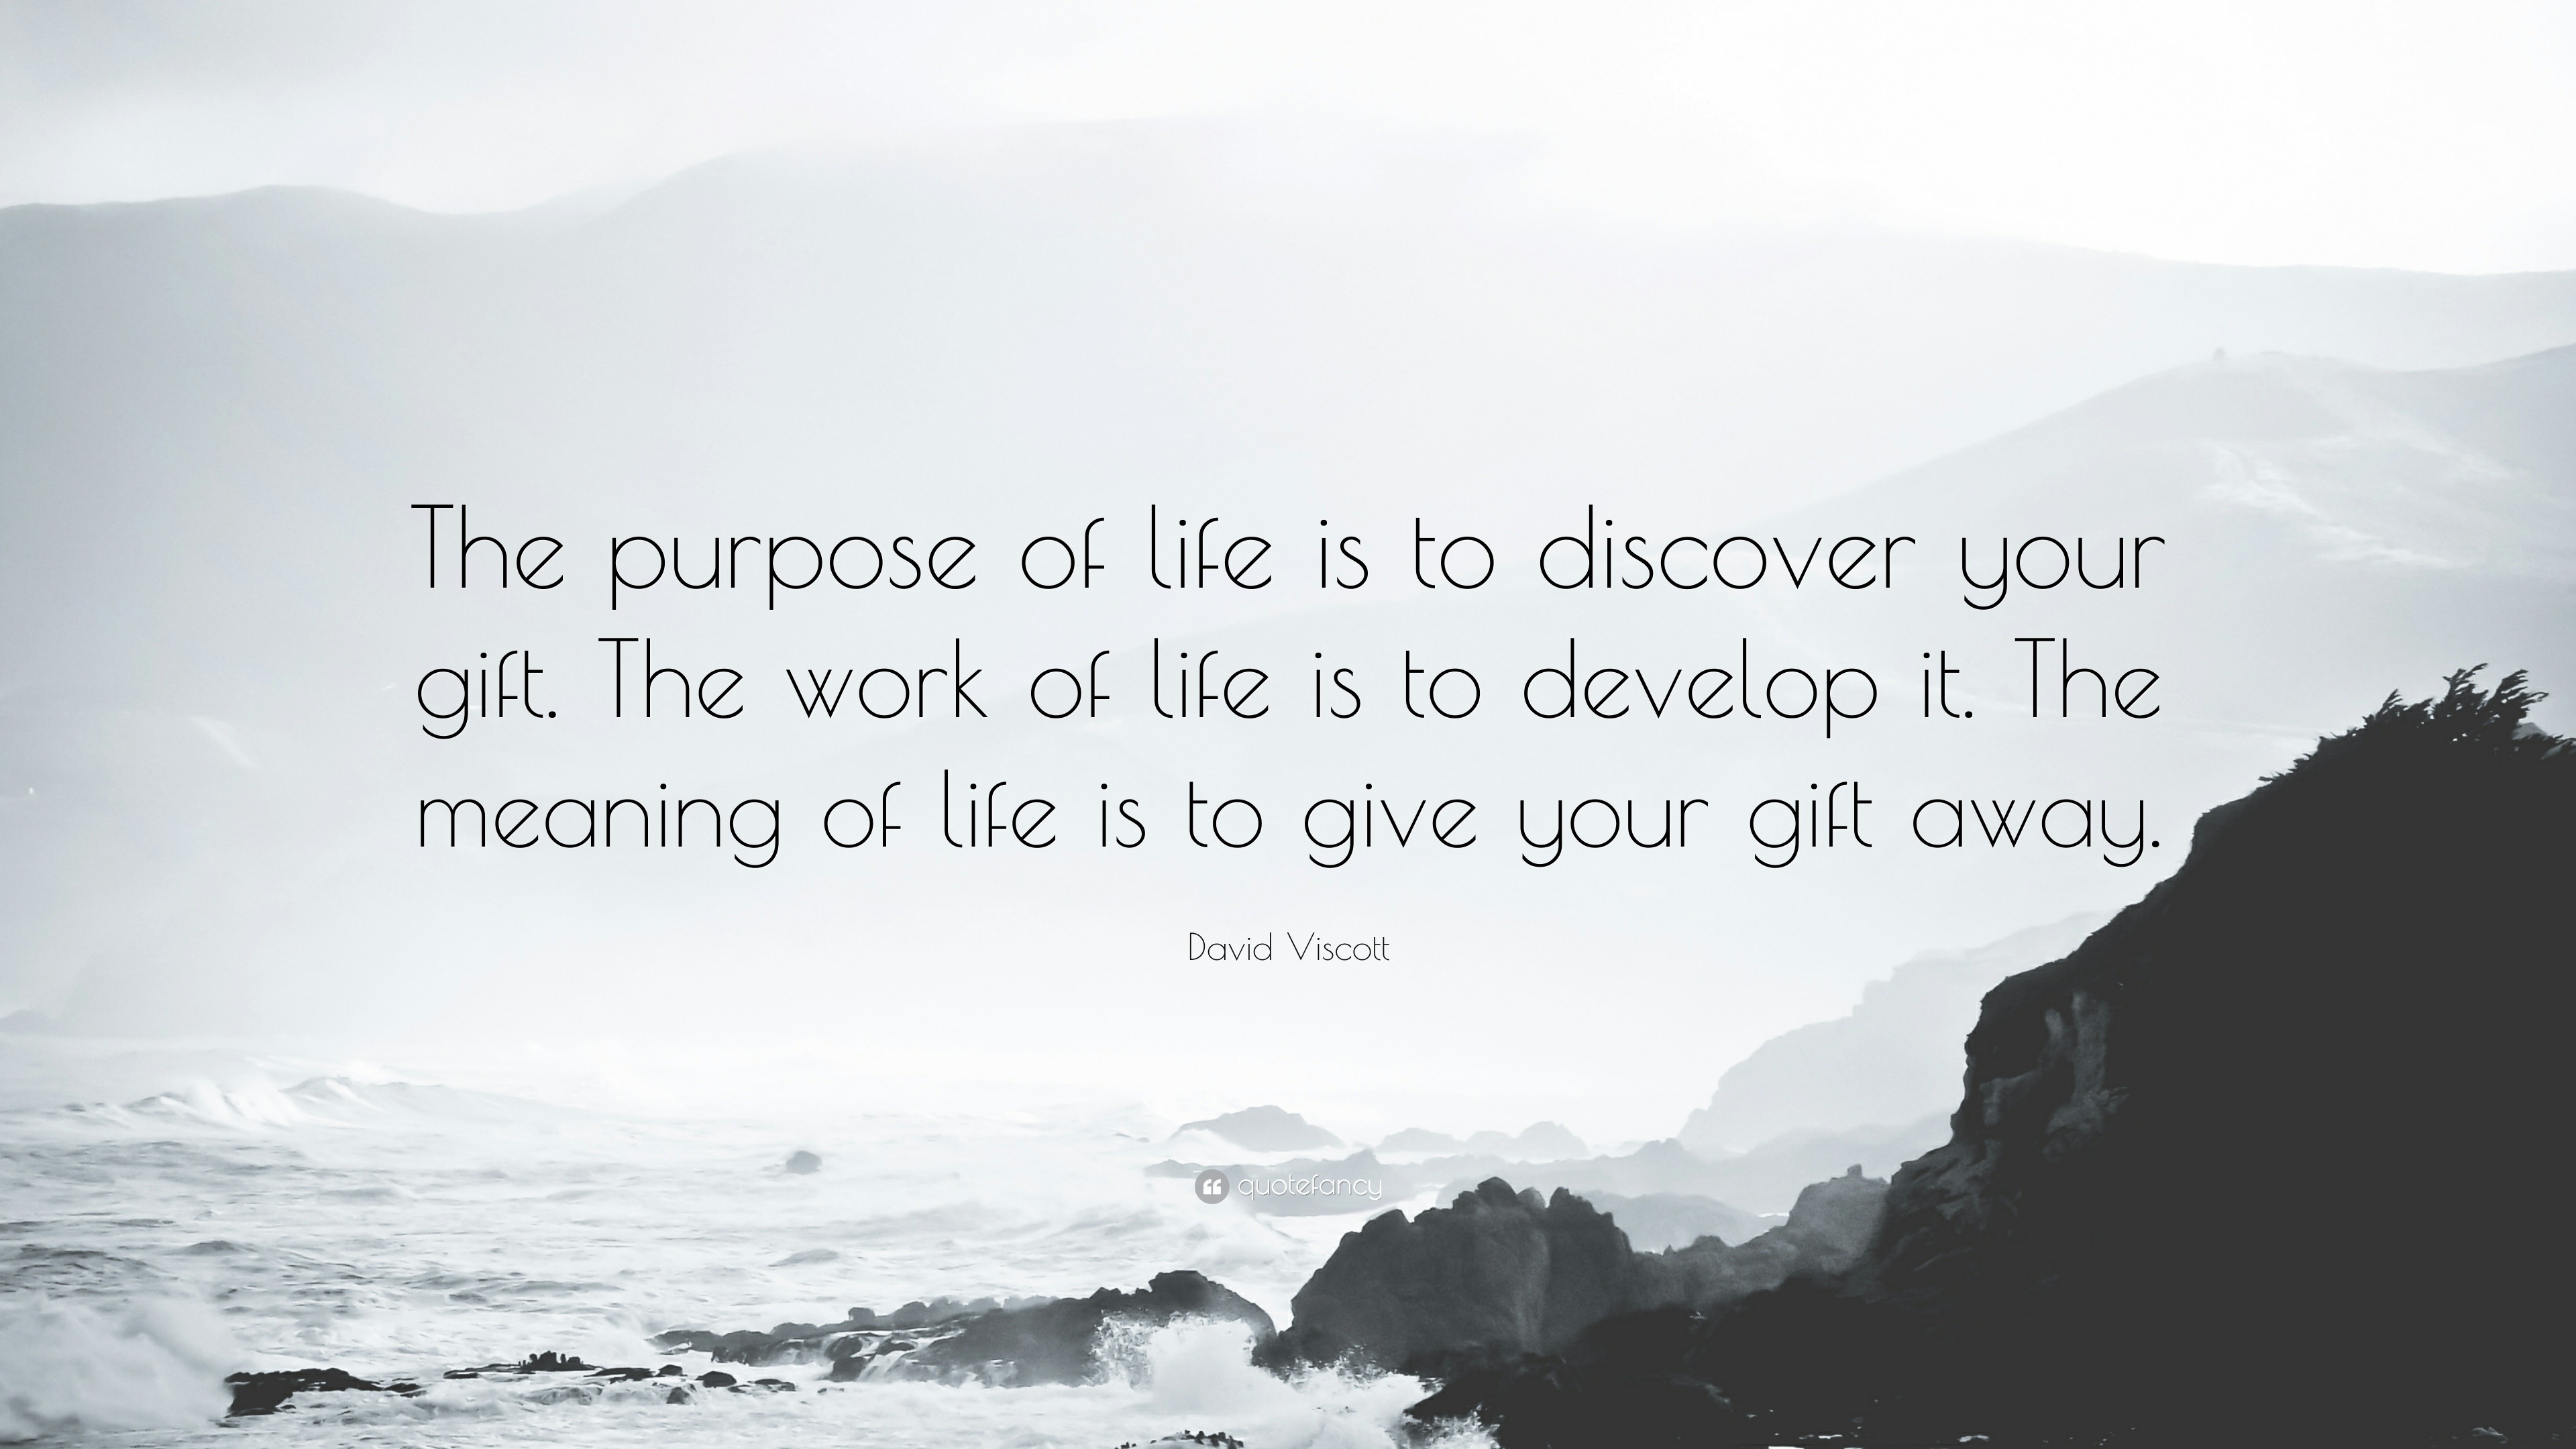 David Viscott Quote: “The purpose of life is to discover your gift. The